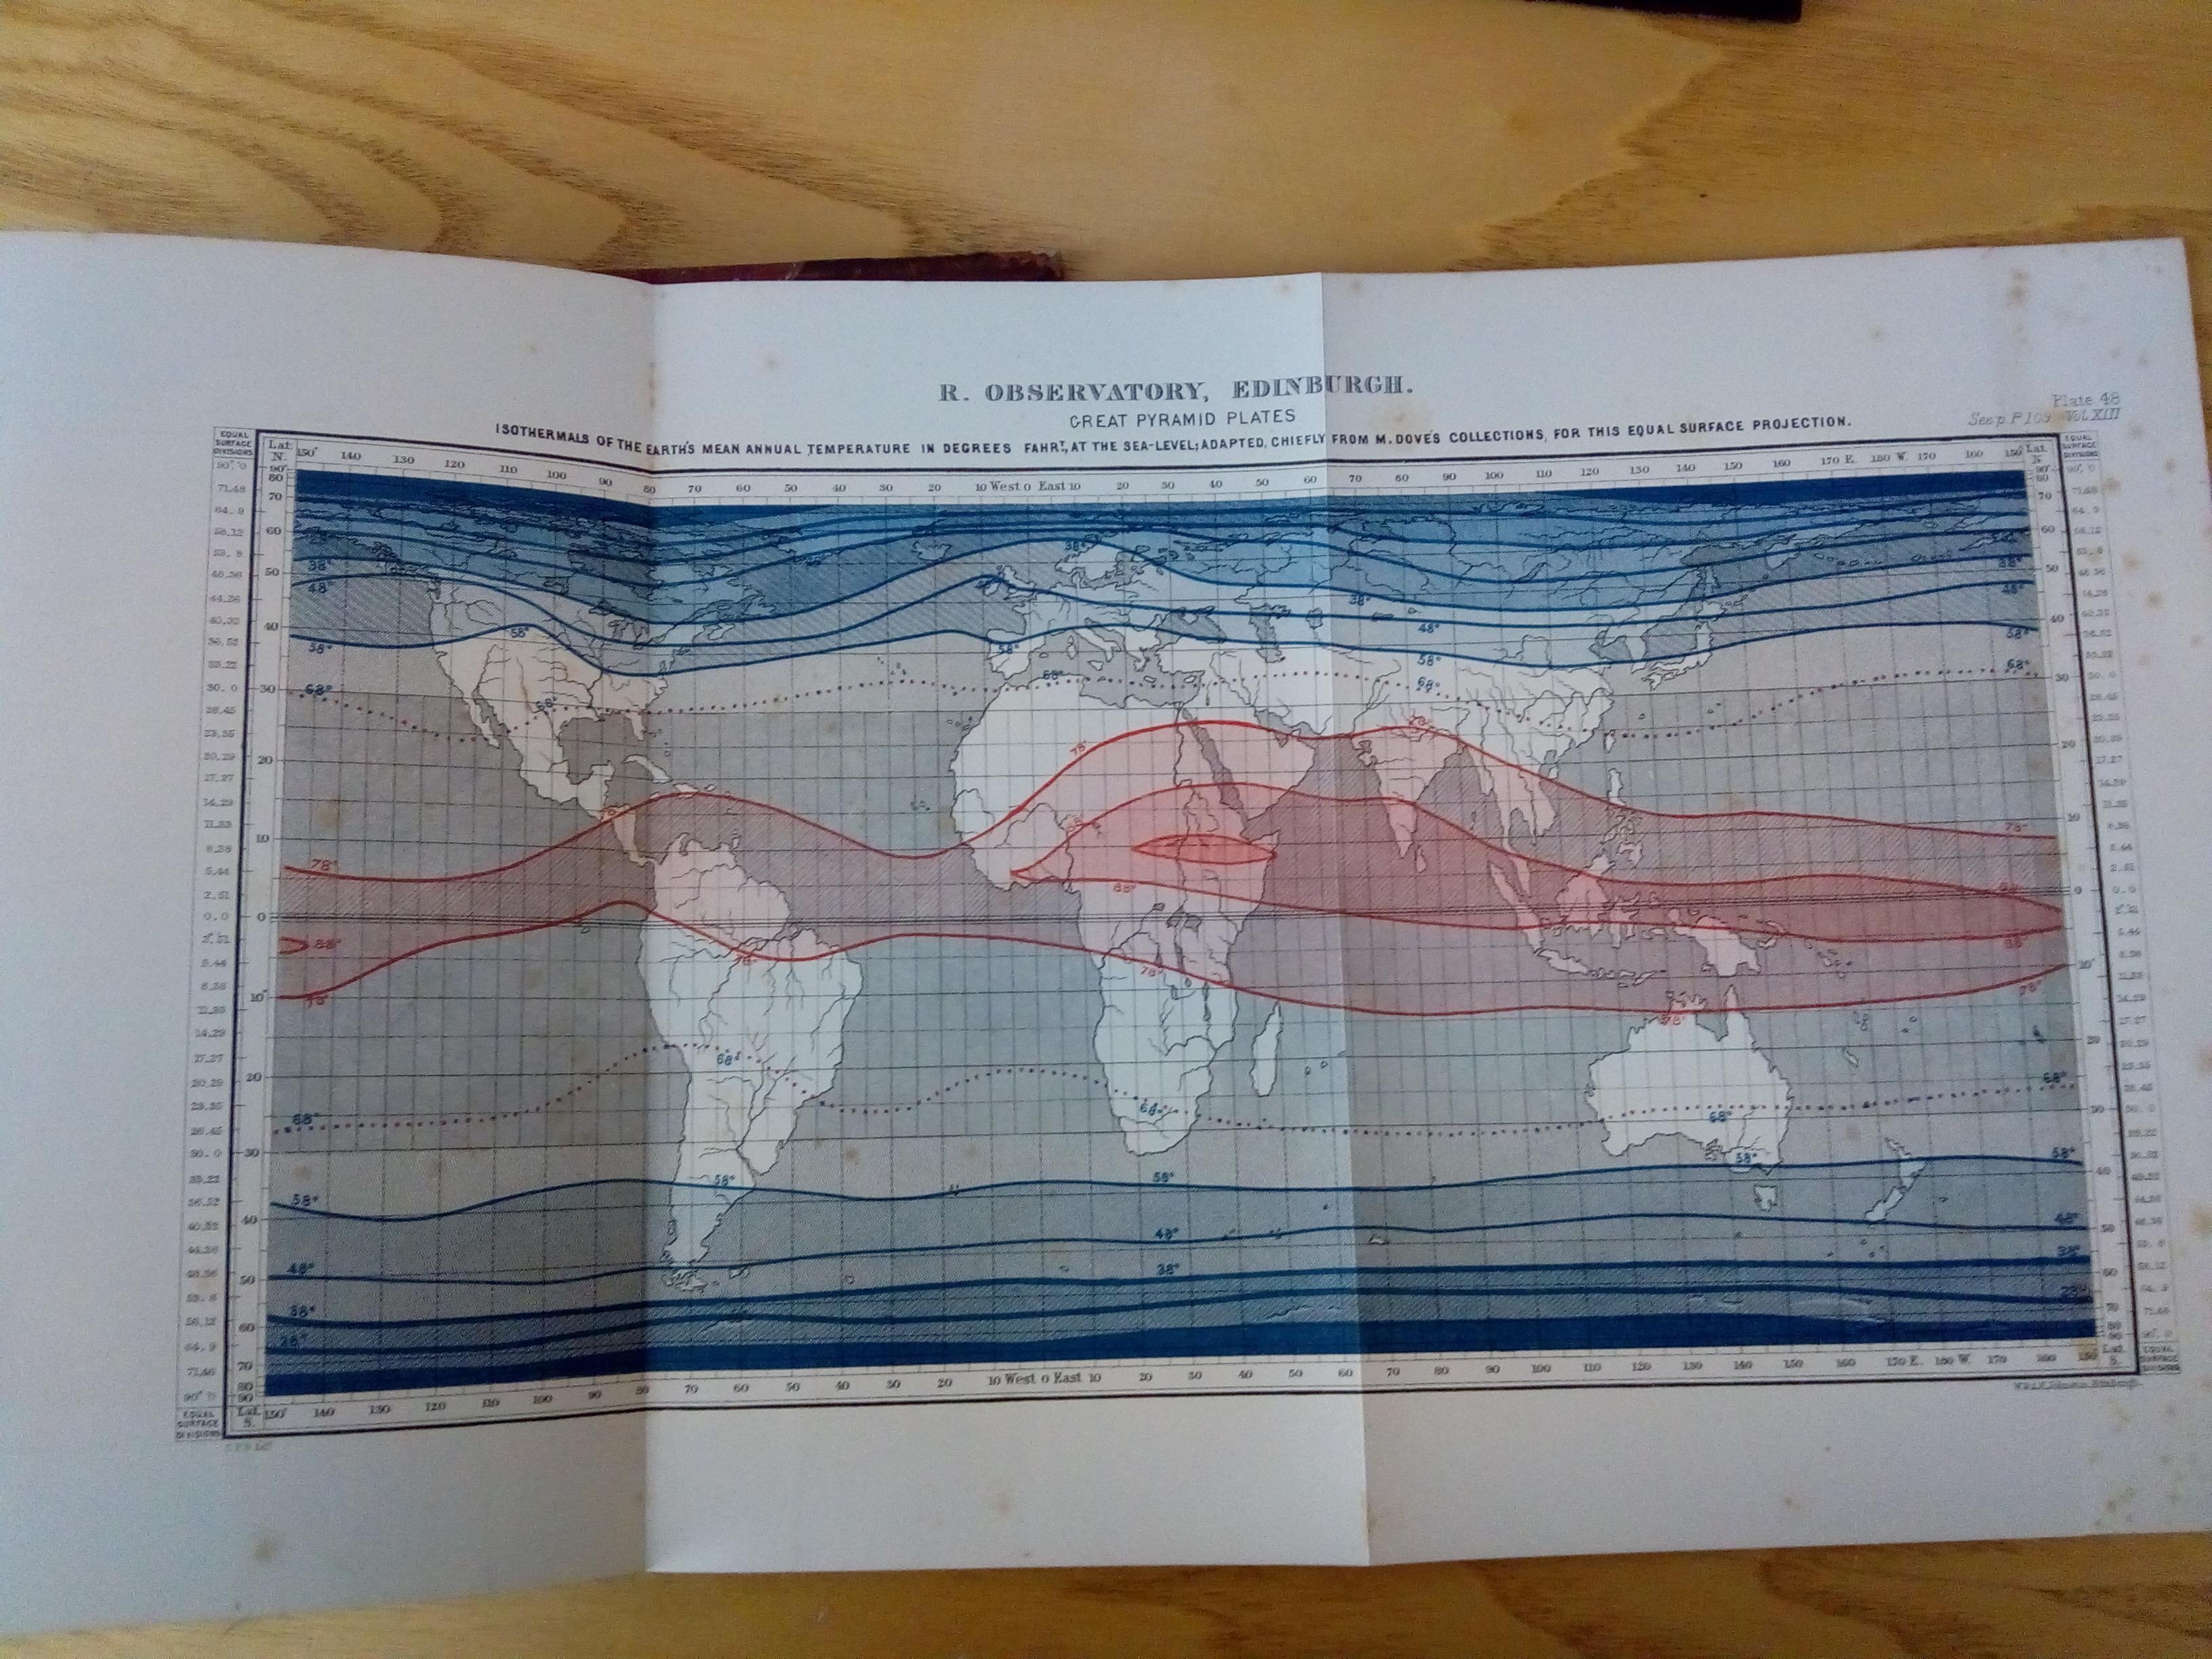 Global isotherm map by Piazzi Smyth